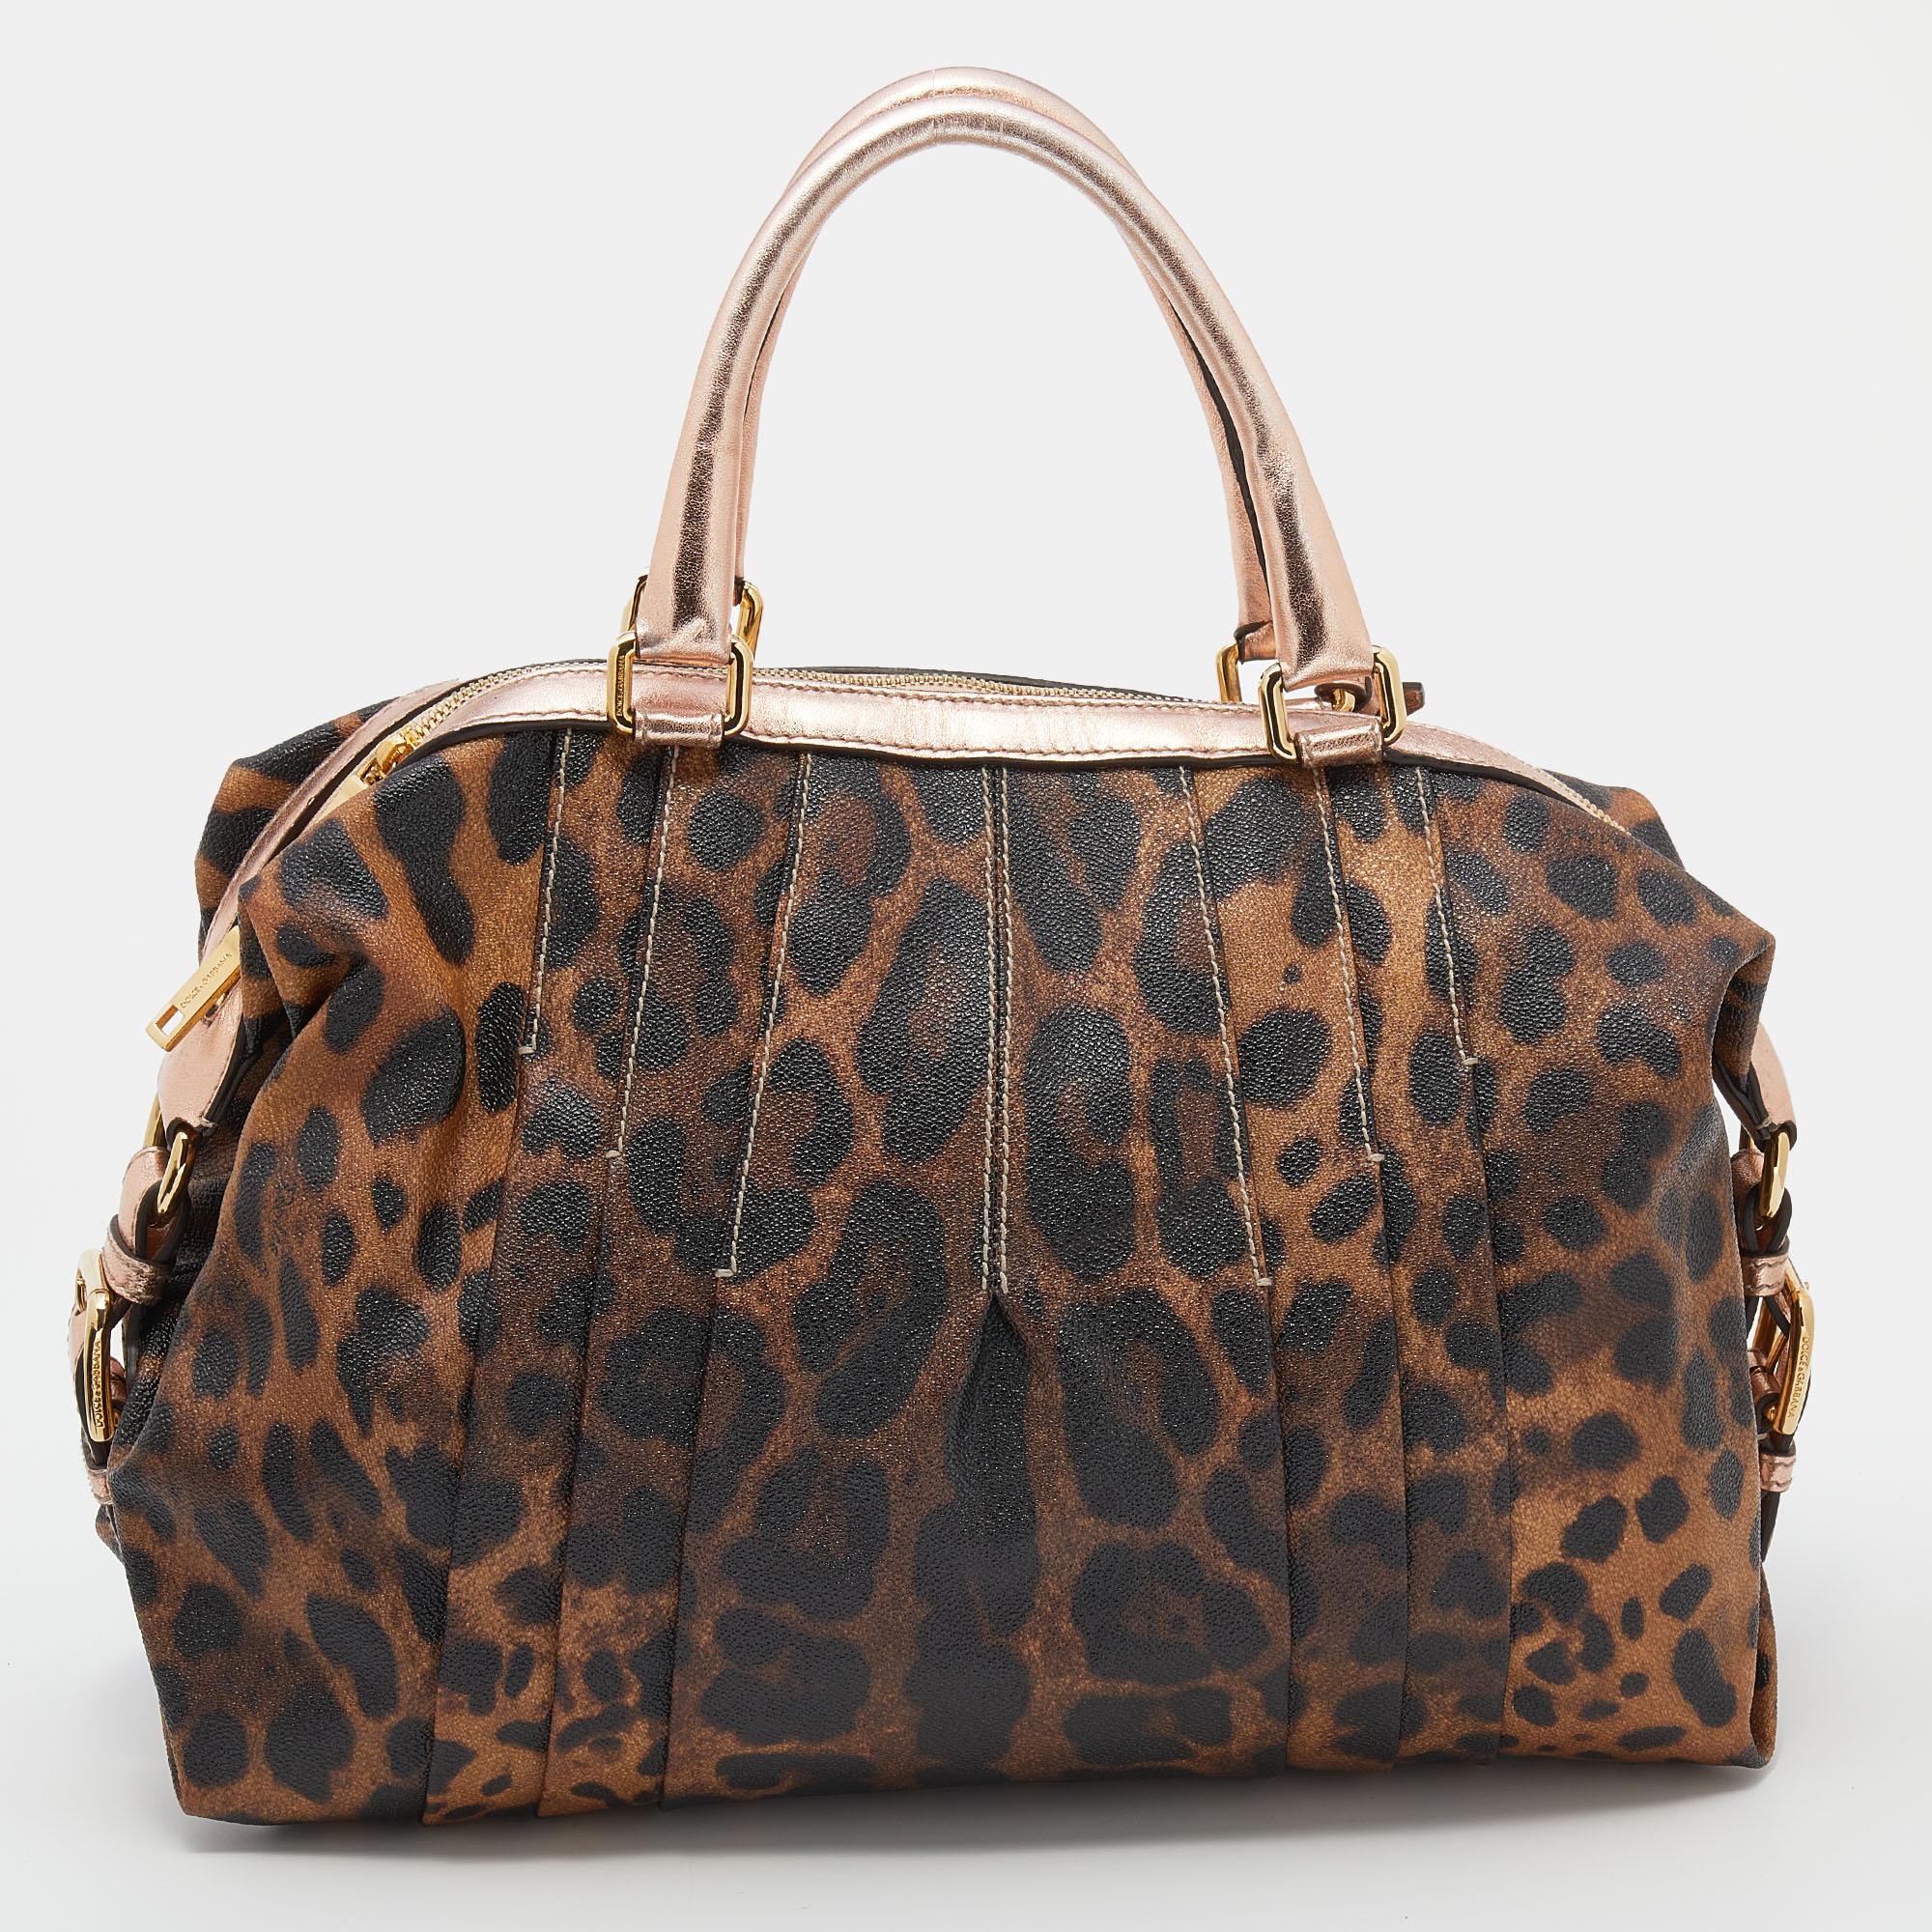 This satchel from Dolce & Gabbana is both elegant and functional. Crafted from brown-rose gold leopard printed canvas and leather, the bag features two top handles and gold-tone hardware. The canvas-lined interior has enough space to hold all your